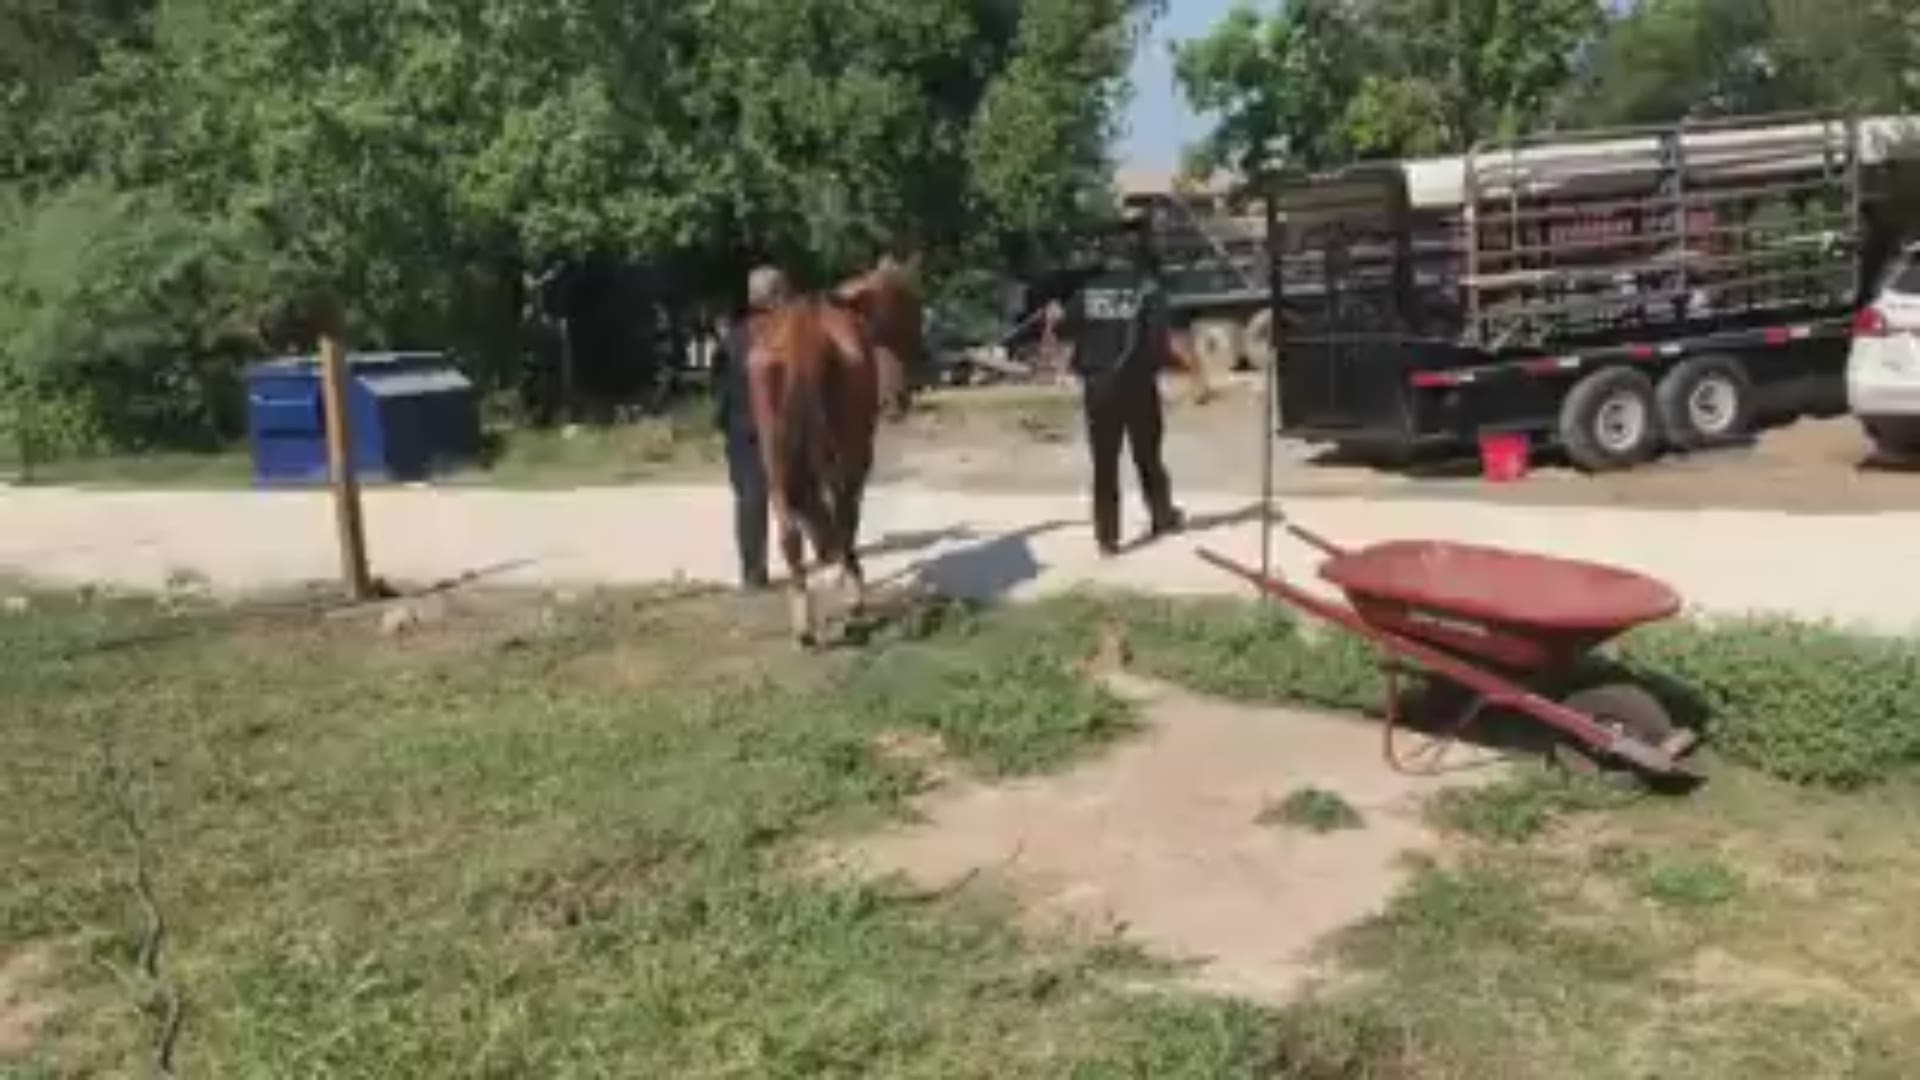 Investigators say the horse and donkey and been severely neglected, at least for months. A warrant  suggests the animals have been "cruelly treated," according to the constable's office.